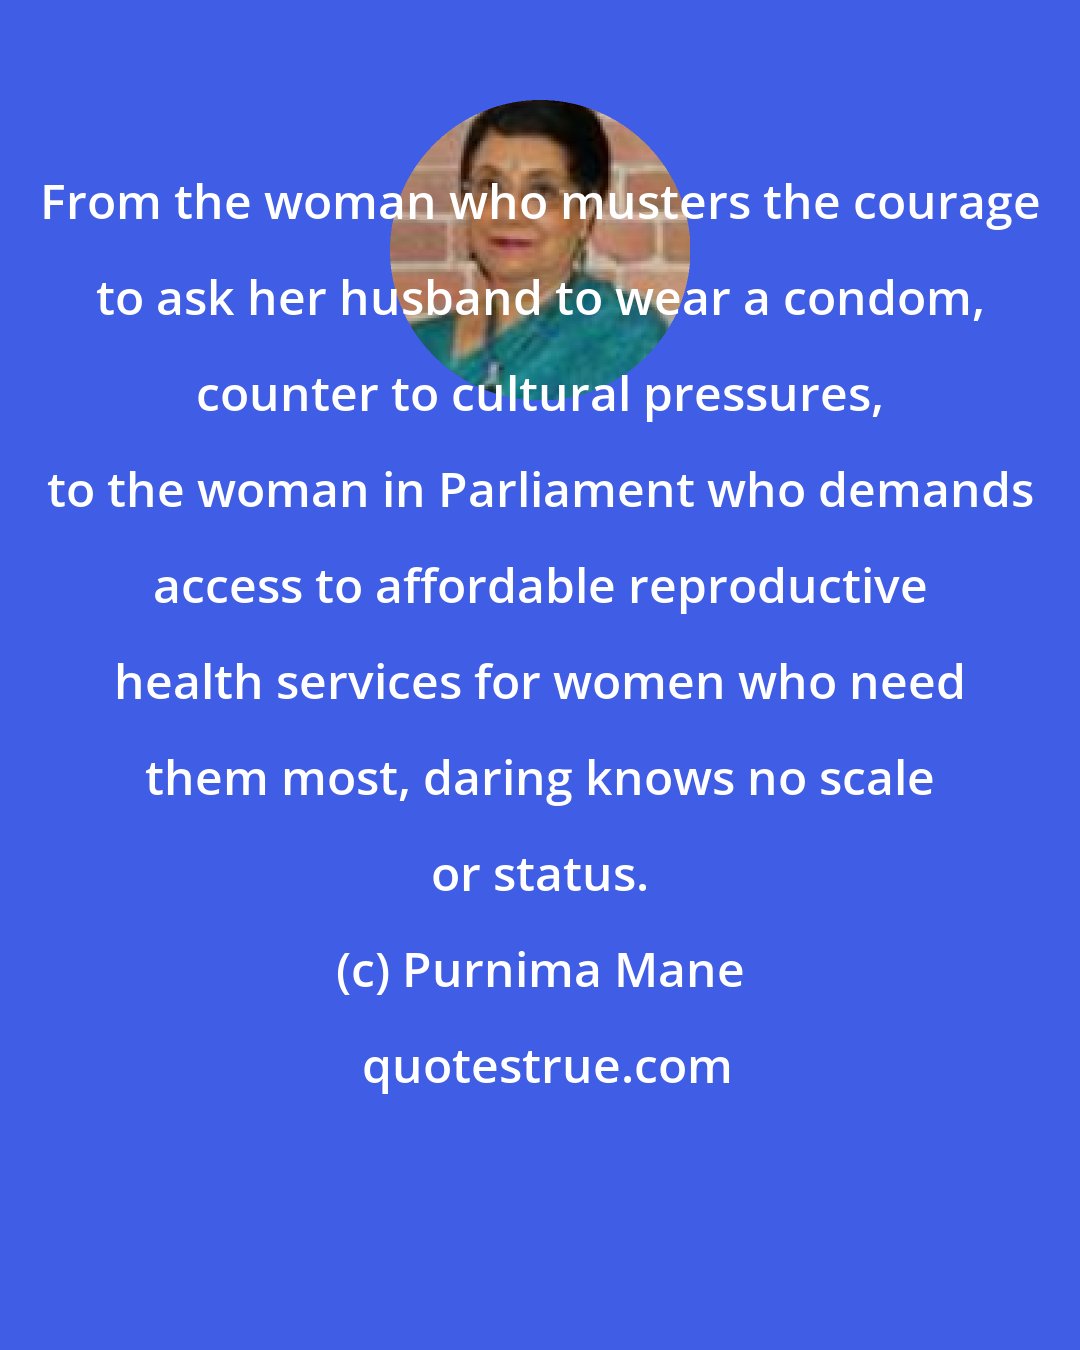 Purnima Mane: From the woman who musters the courage to ask her husband to wear a condom, counter to cultural pressures, to the woman in Parliament who demands access to affordable reproductive health services for women who need them most, daring knows no scale or status.